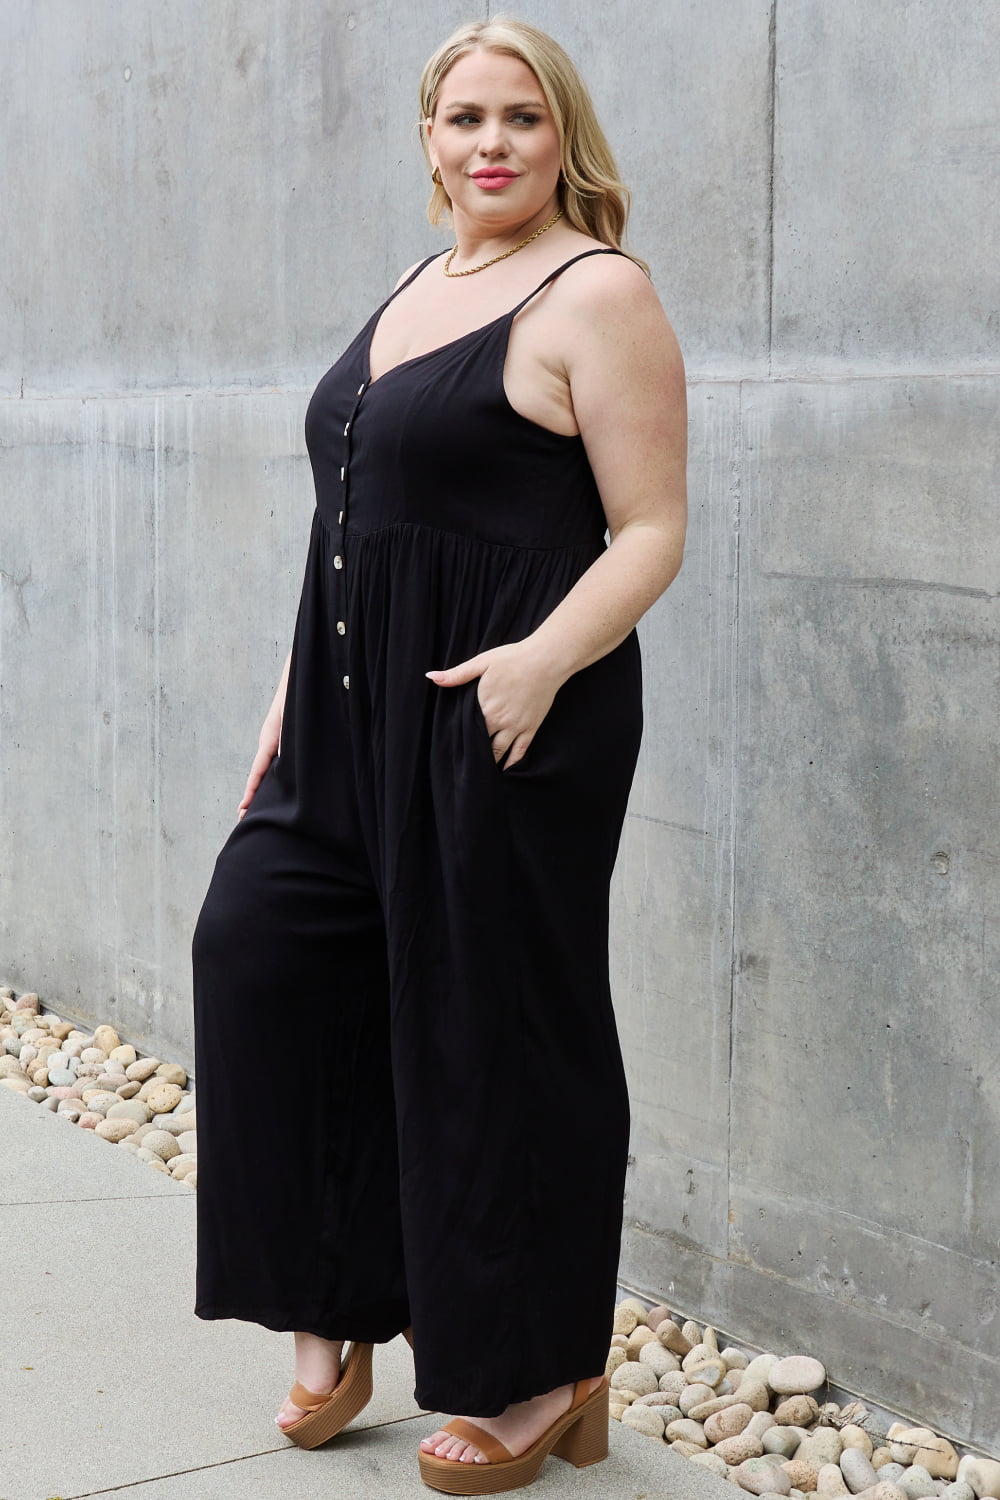 All Day Full Size Wide Leg Button Down Jumpsuit in Black - Women’s Clothing & Accessories - Jumpsuits & Rompers - 6